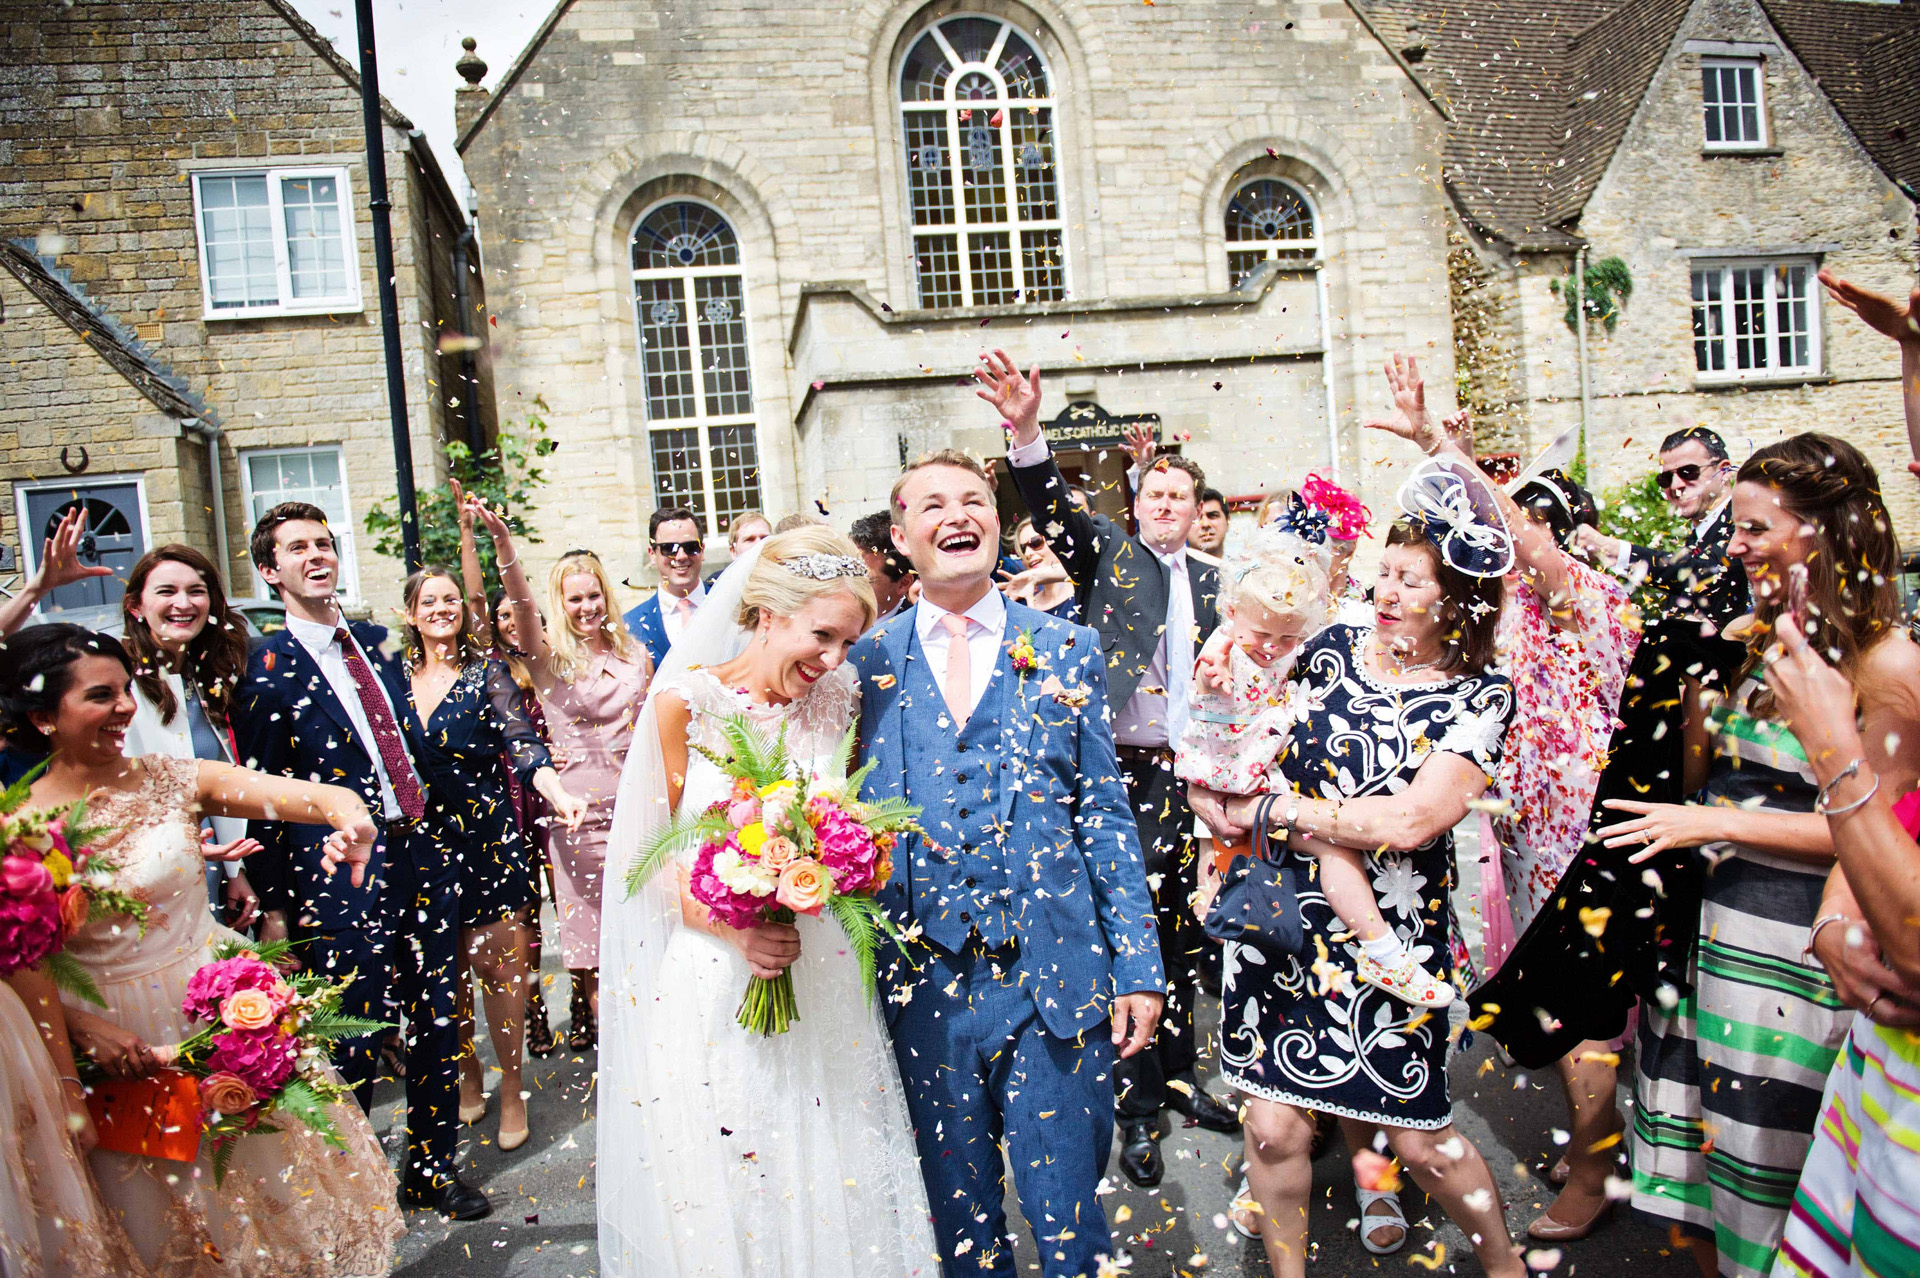 Wedding confetti, confetti, bride and groom celebration, wedding guests, Tetbury wedding, wedding photography in the cotswolds